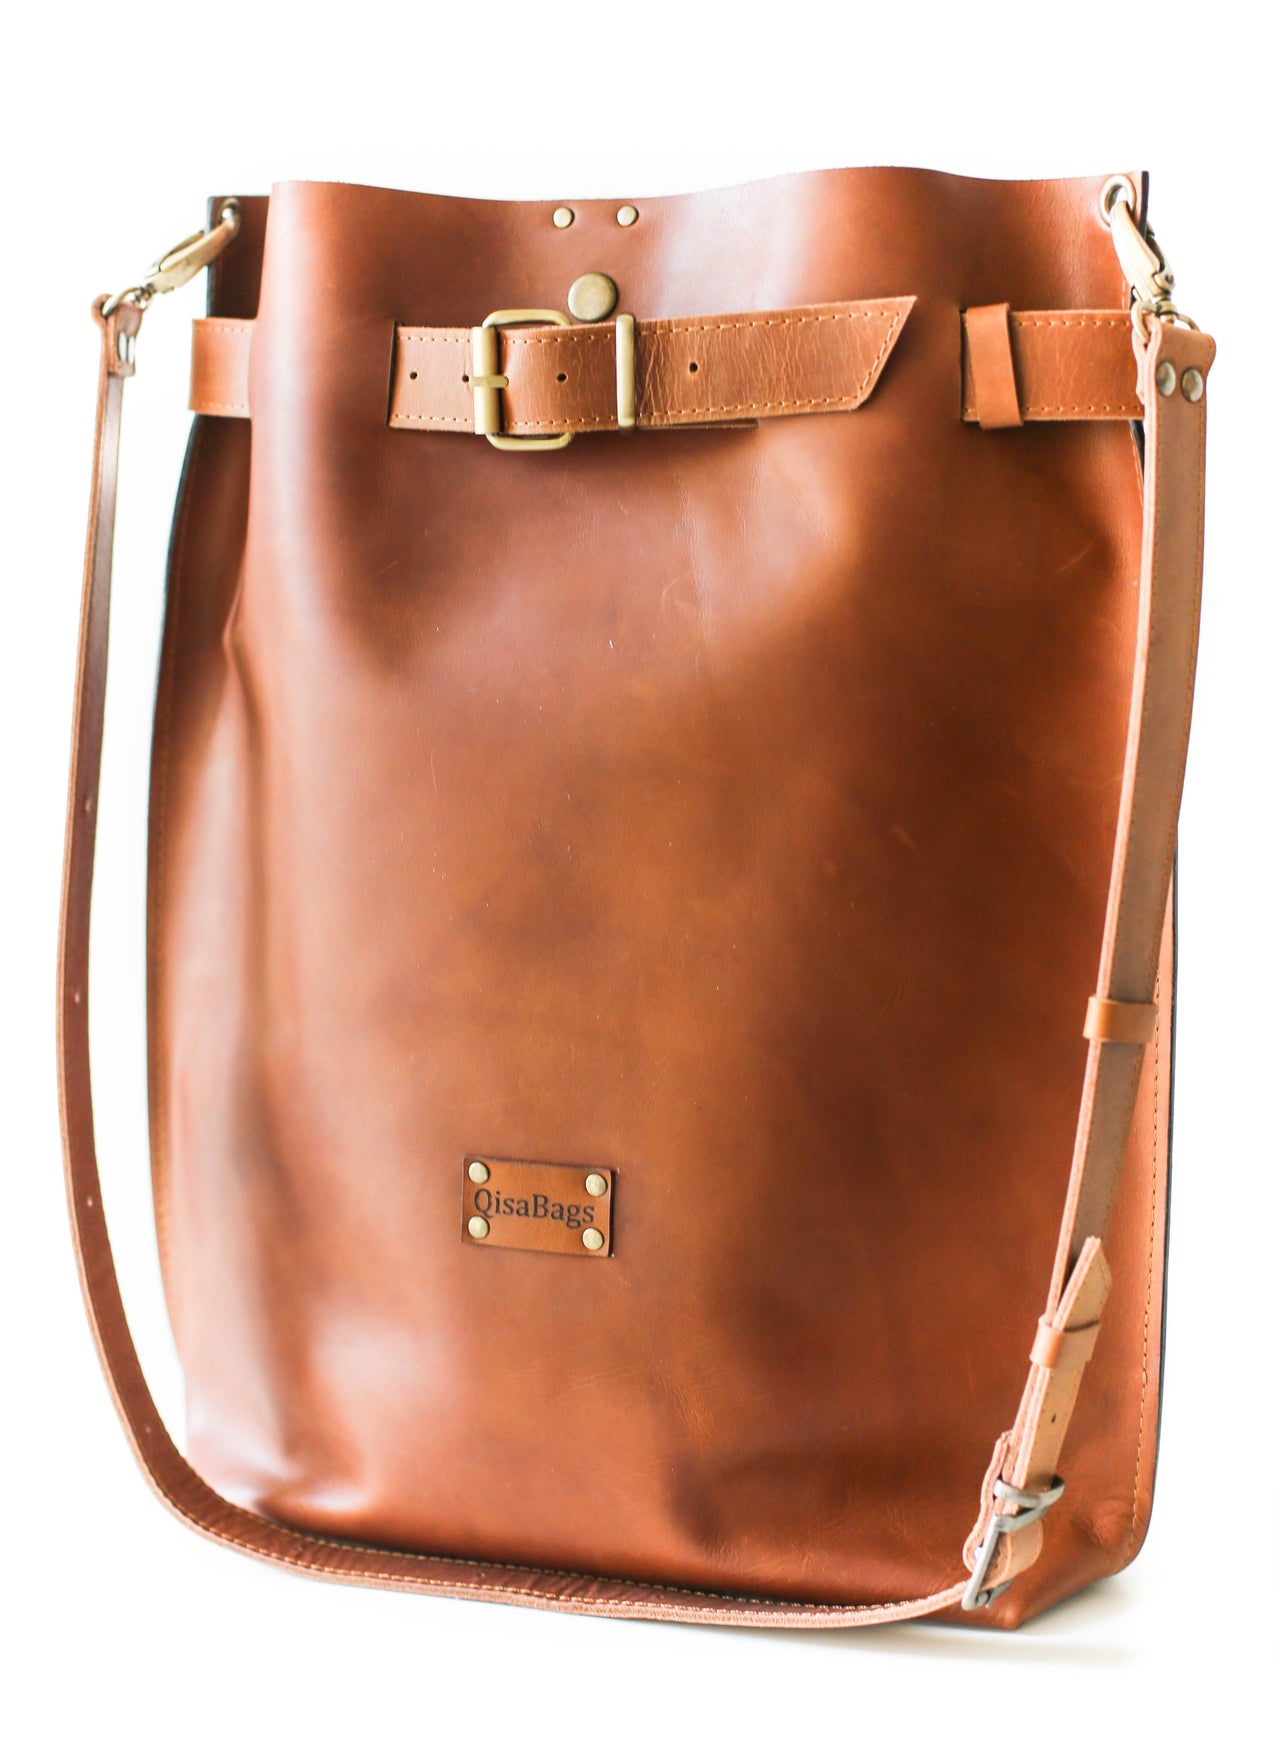 Large brown leather bag